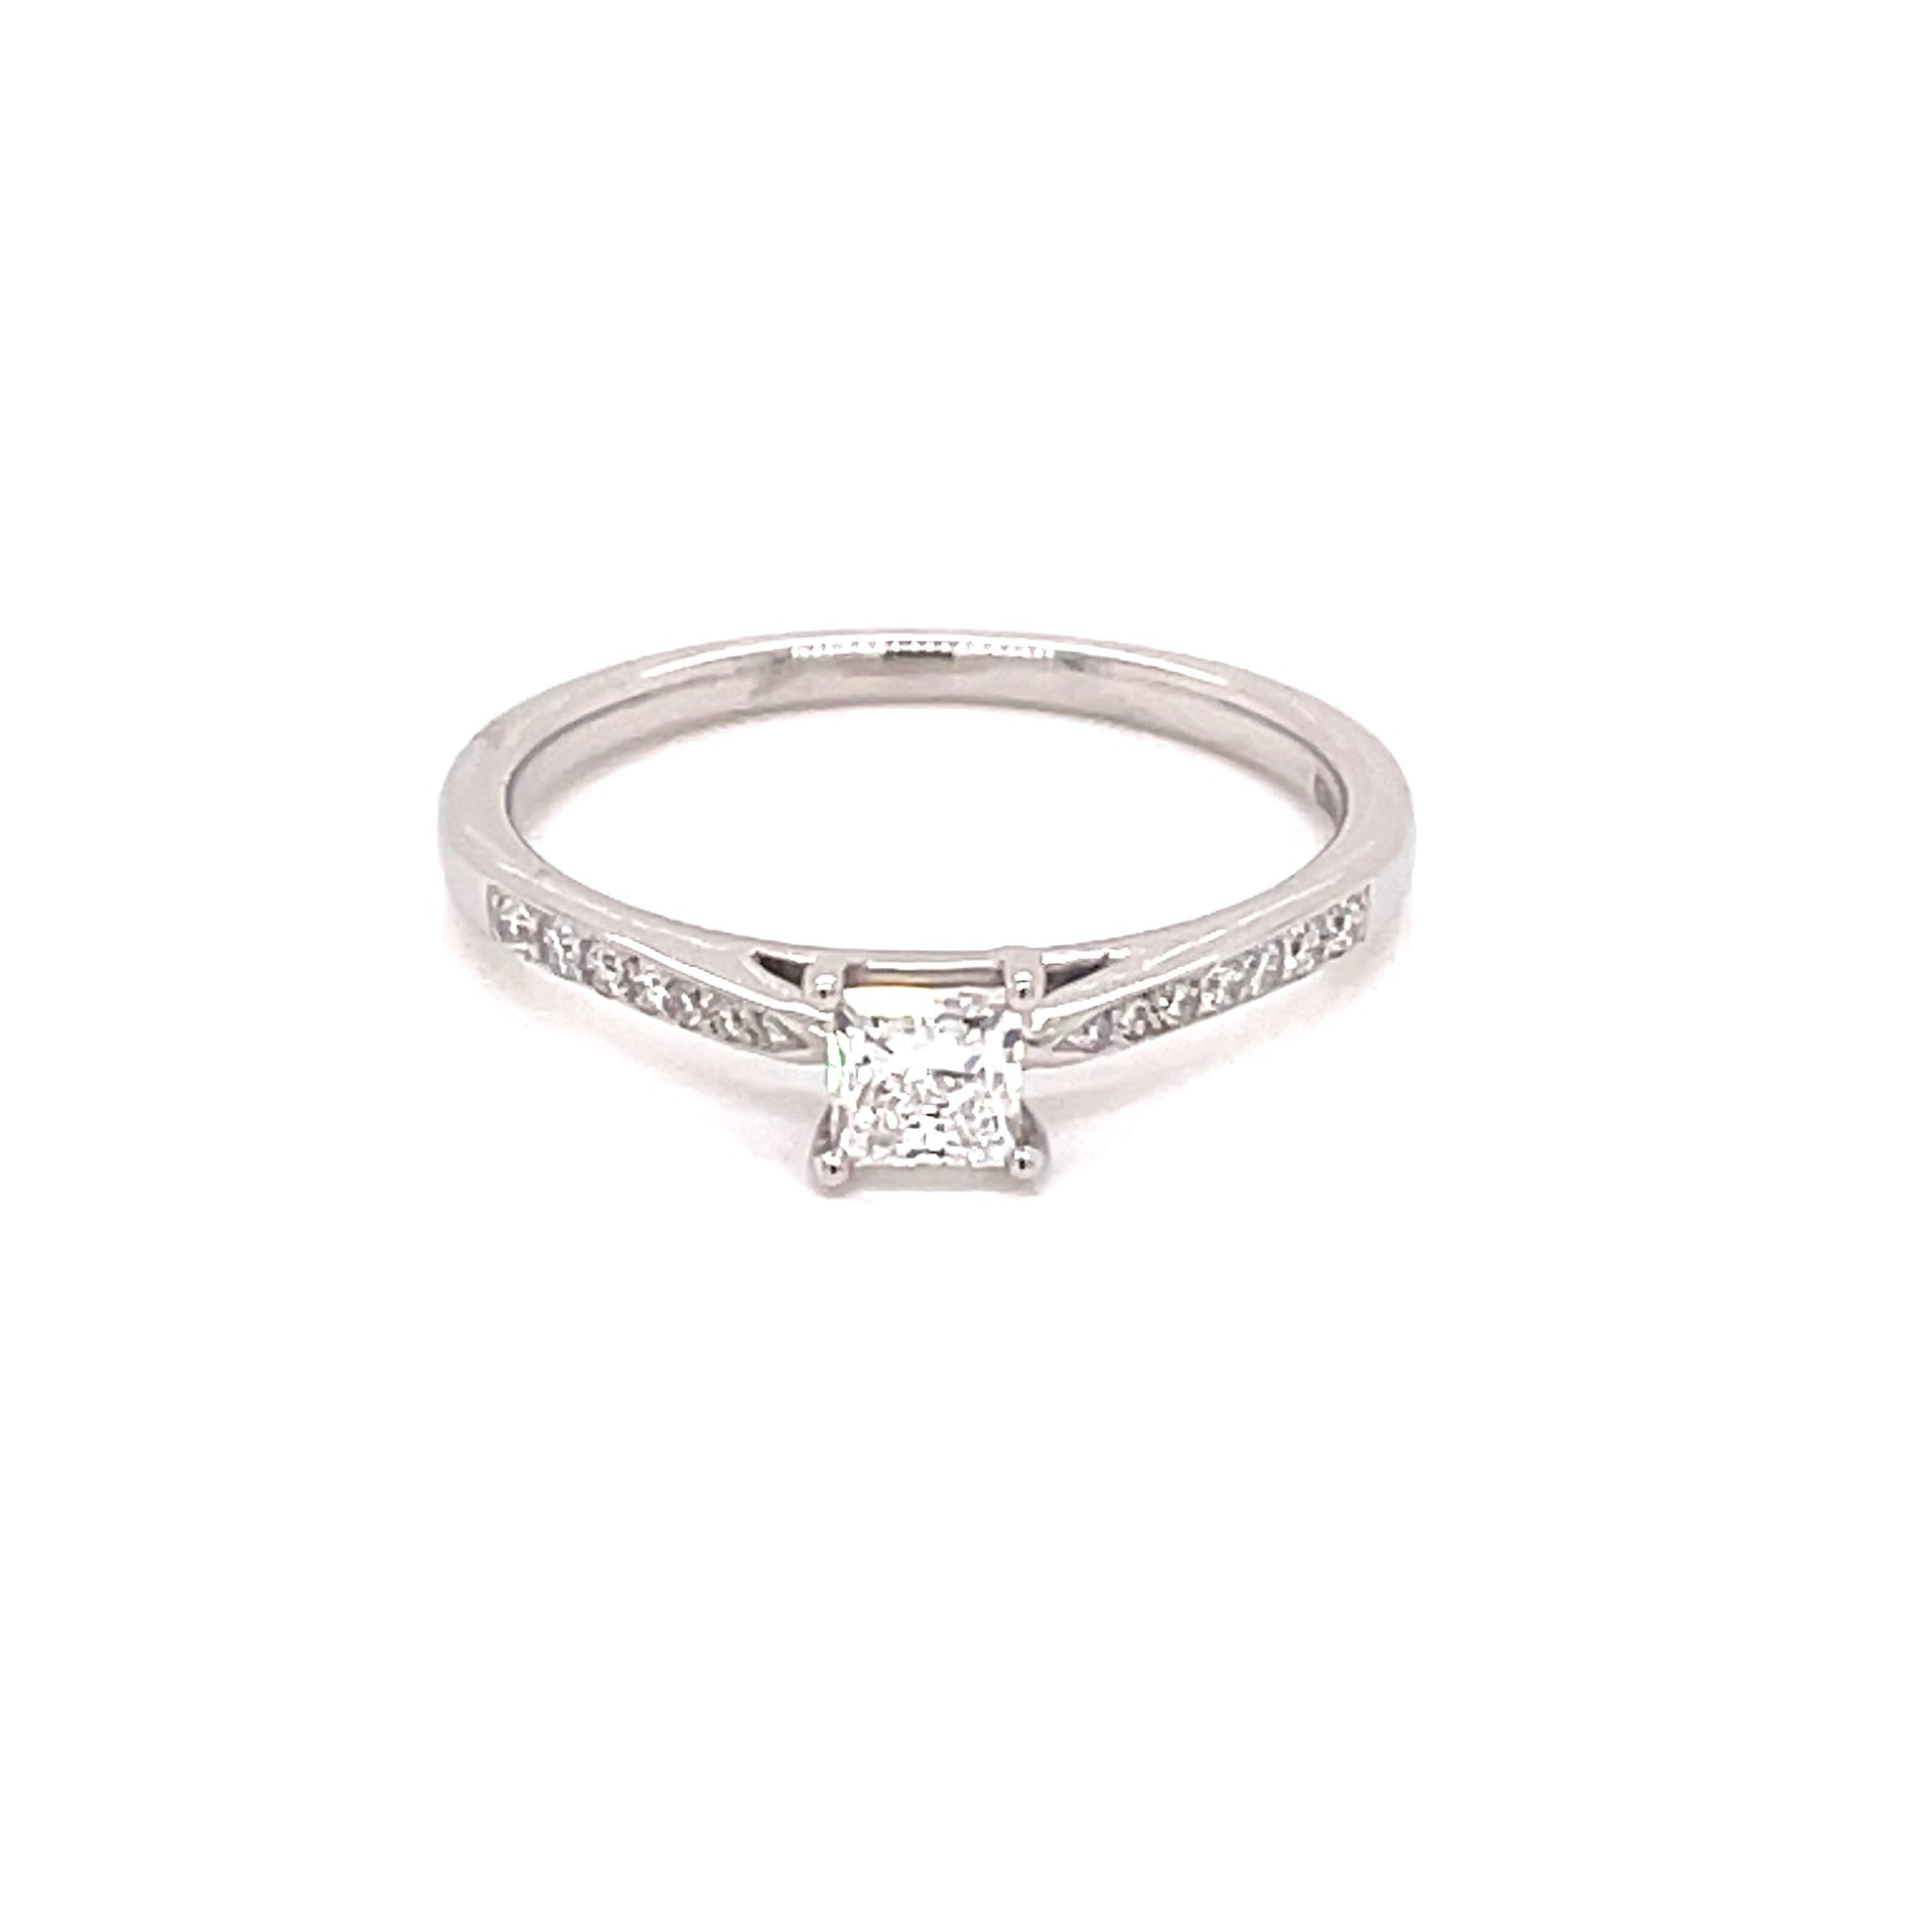 Princess Cut Diamond Solitaire With Diamond Set Shoulders - 0.45cts  Gardiner Brothers   